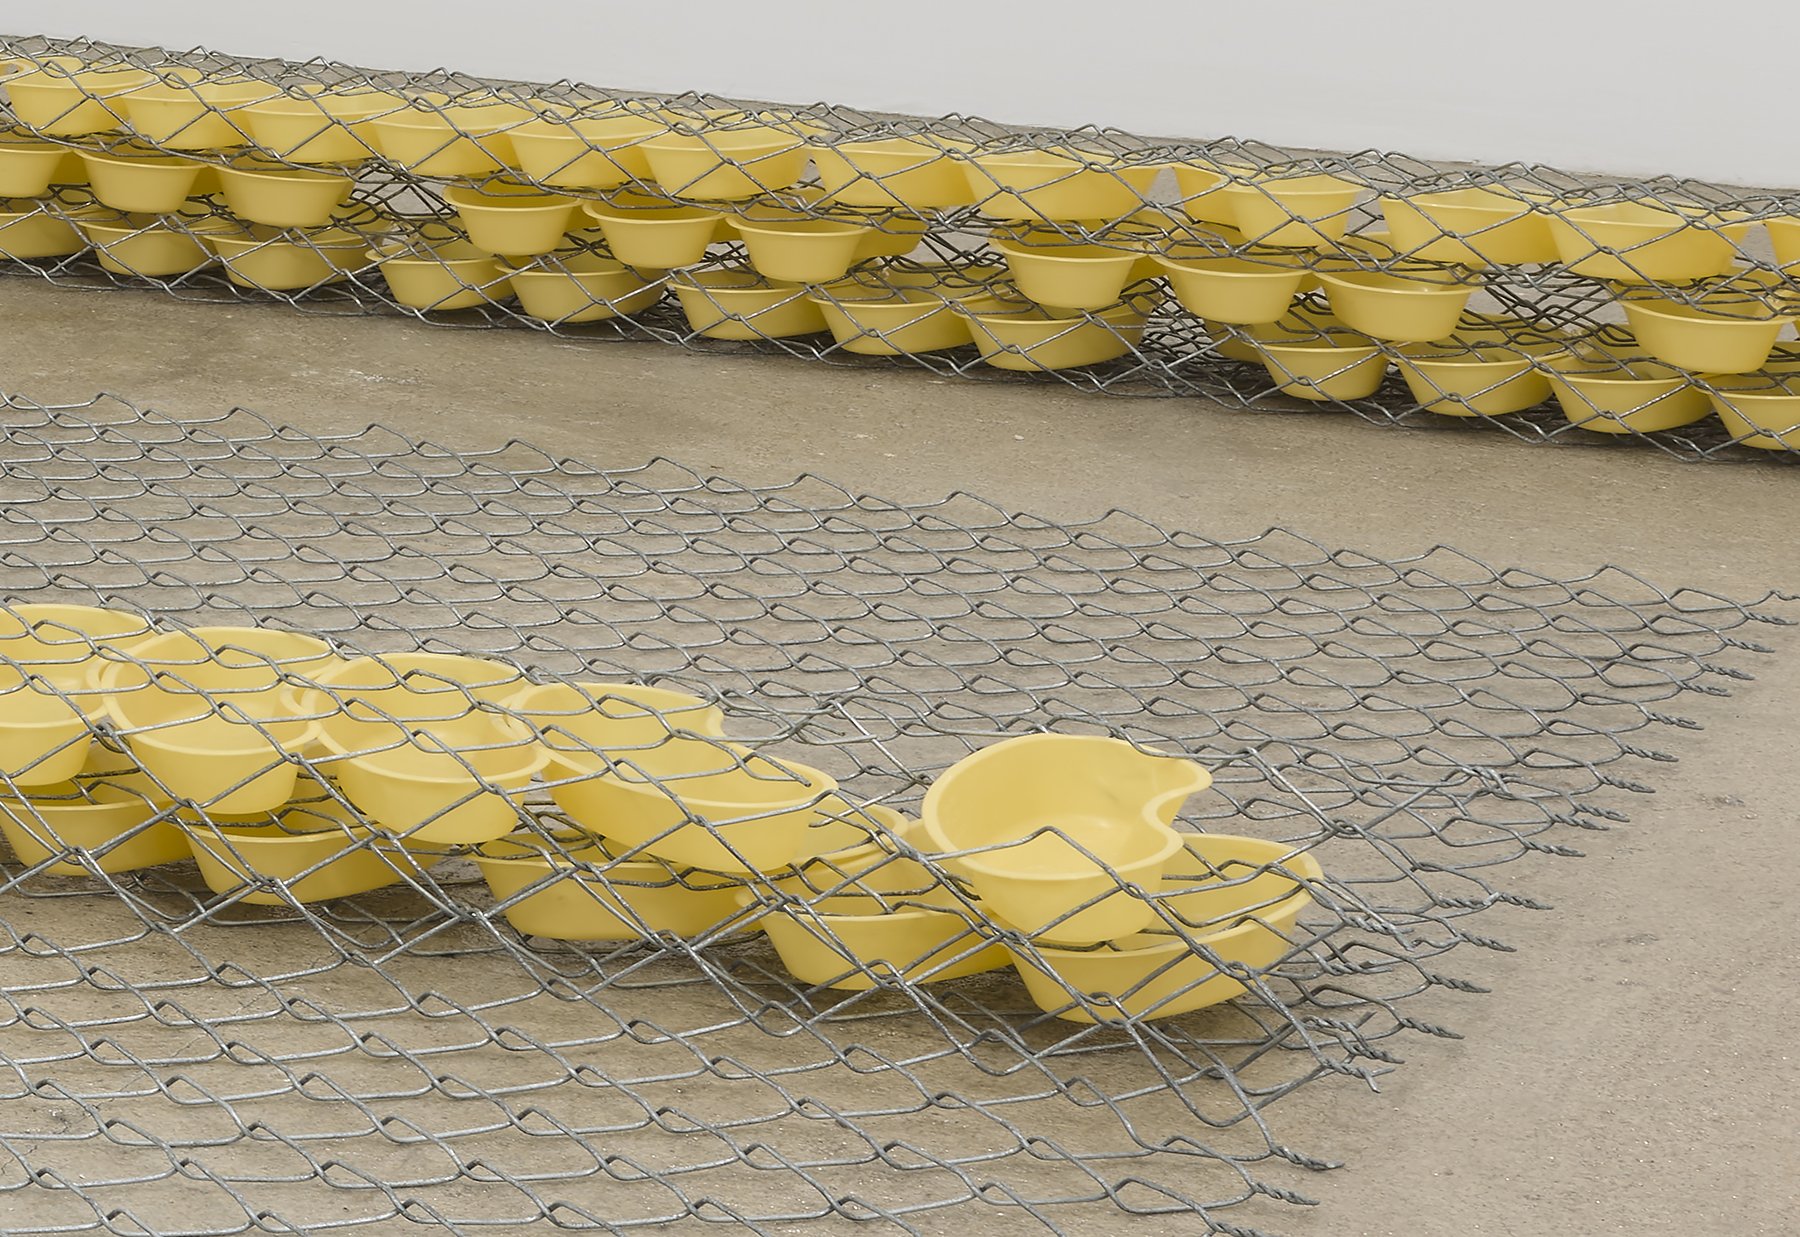  Bat-Ami Rivlin  Untitled (fence, bedpans) , 2021 (detail) chain link fencing, yellow kidney basins 8 x 120 x 72 inches (20 x 305 x 183 cm) Installation view M 2 3, New York, 2022 BR21 